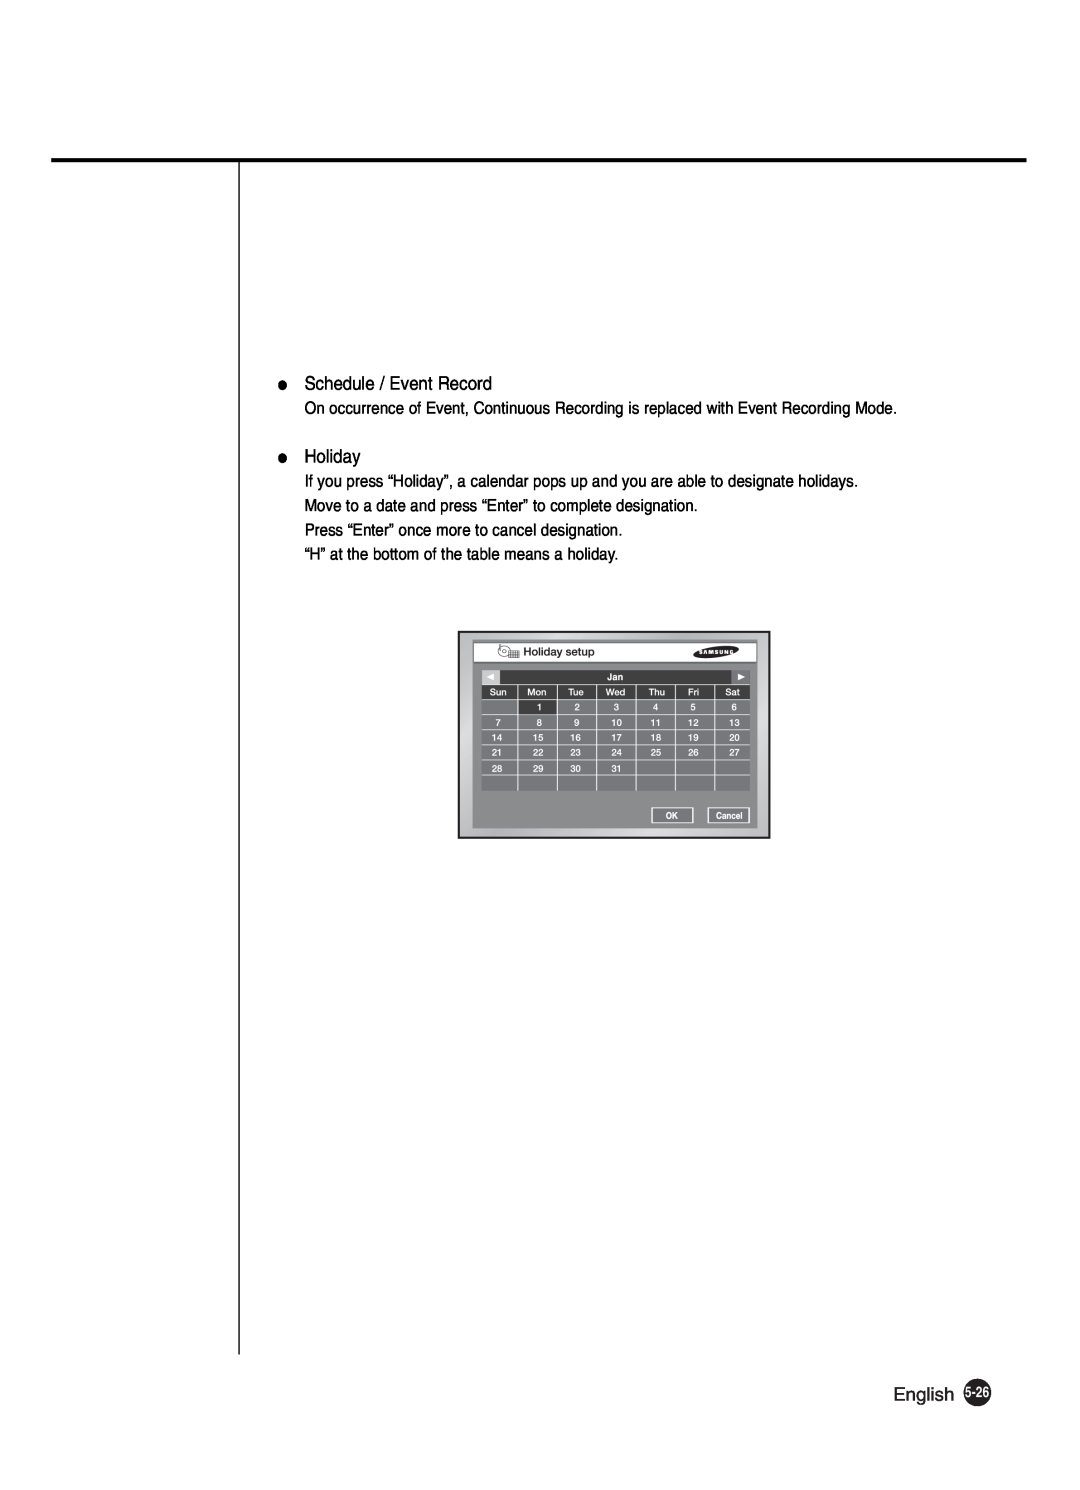 Samsung SHR-2042P250, SHR-2040P250 manual Schedule / Event Record, Holiday, English 